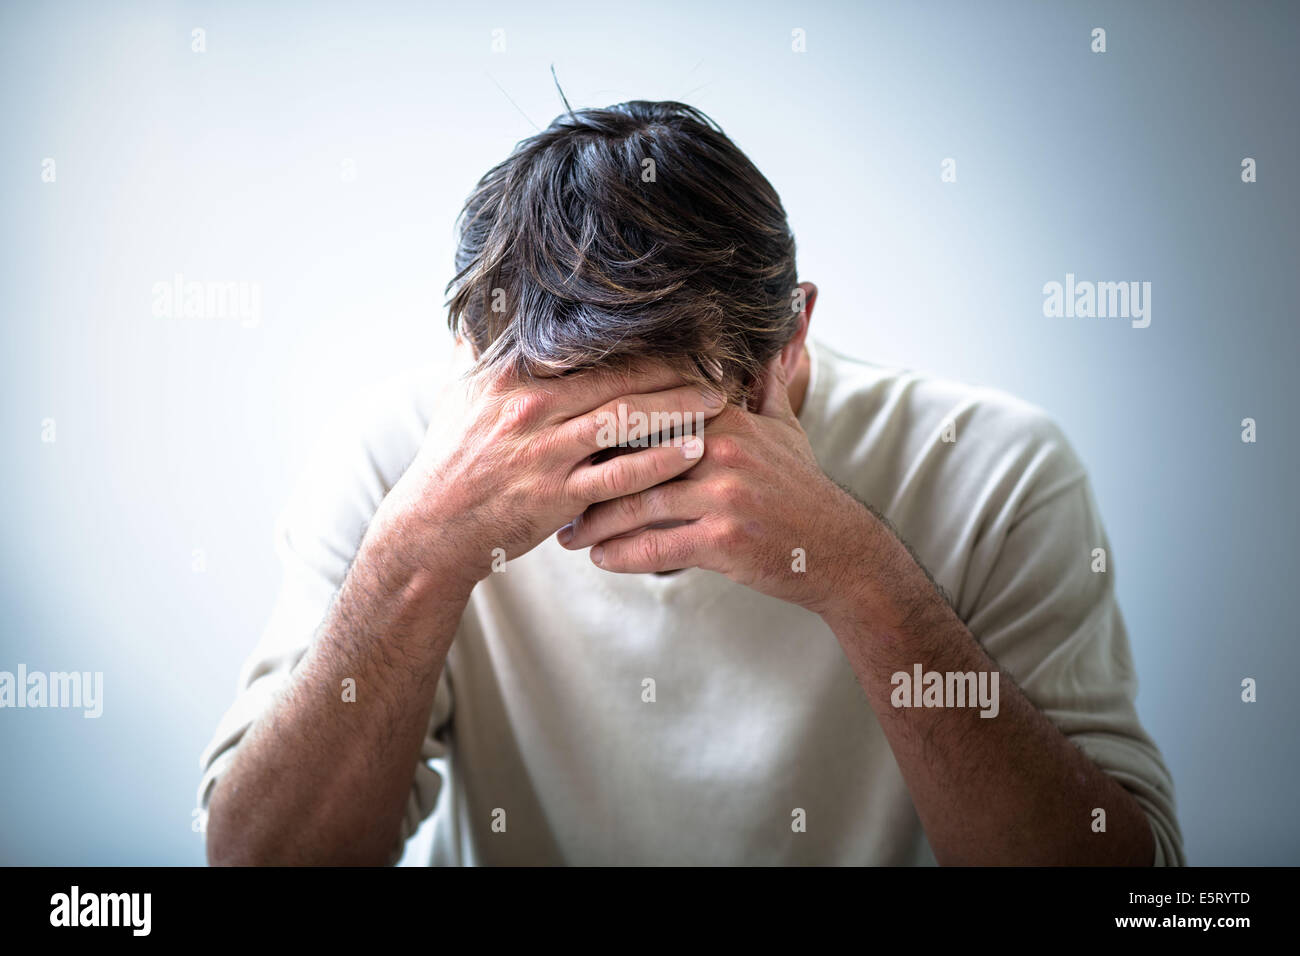 depressed-man-holding-his-head-in-his-hands-E5RYTD.jpg